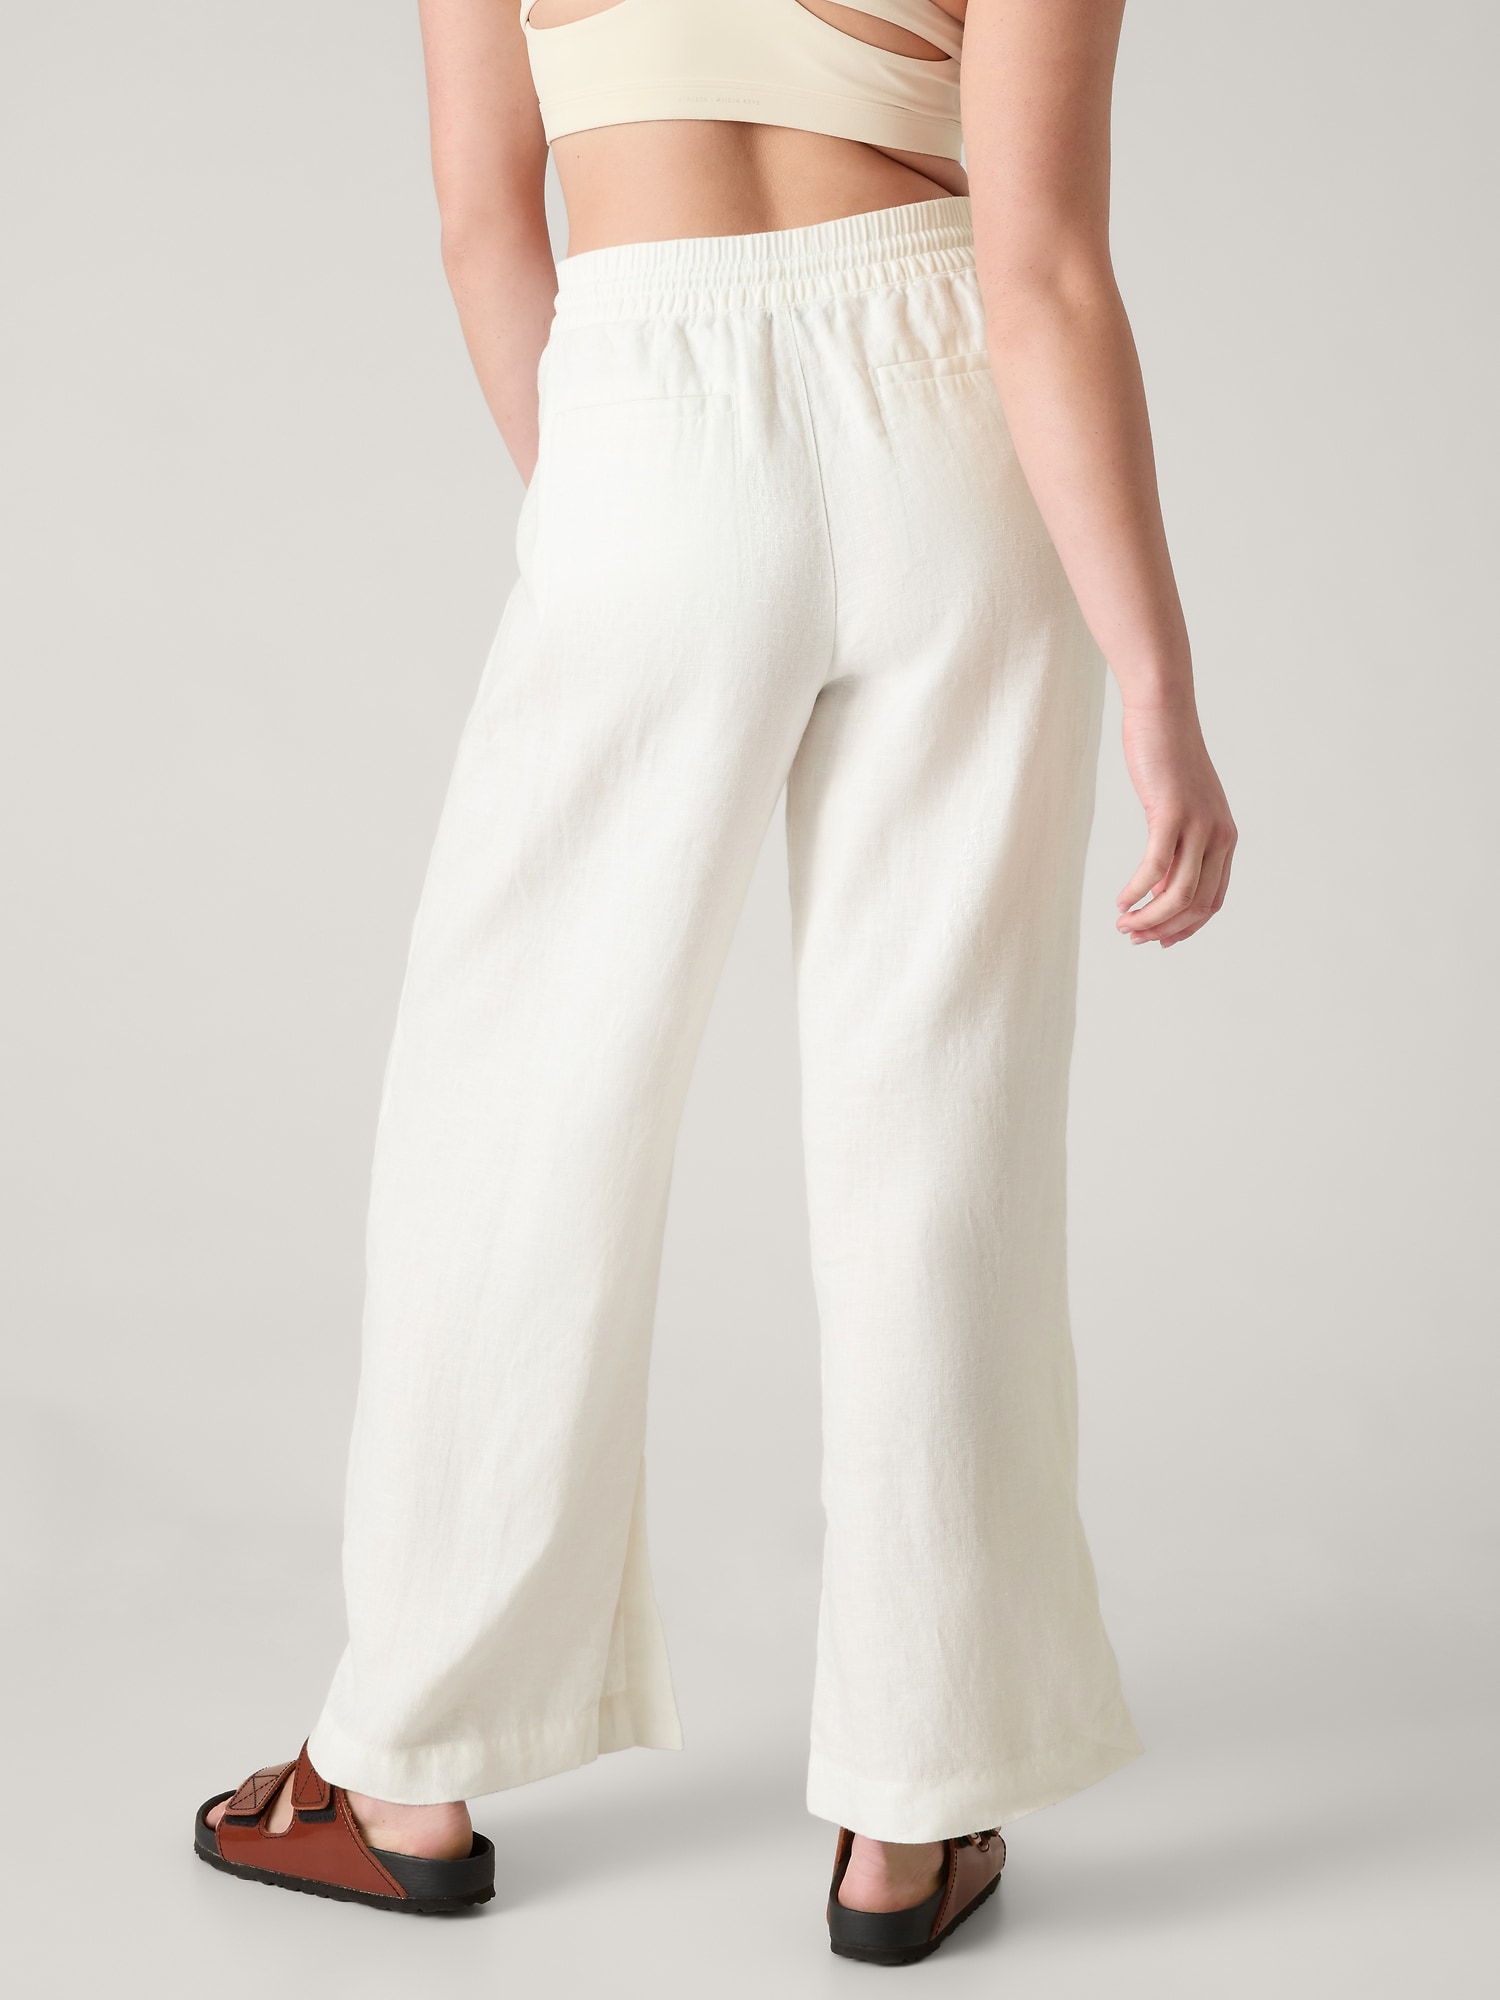 White Linen Pants for Tall Women -  Canada